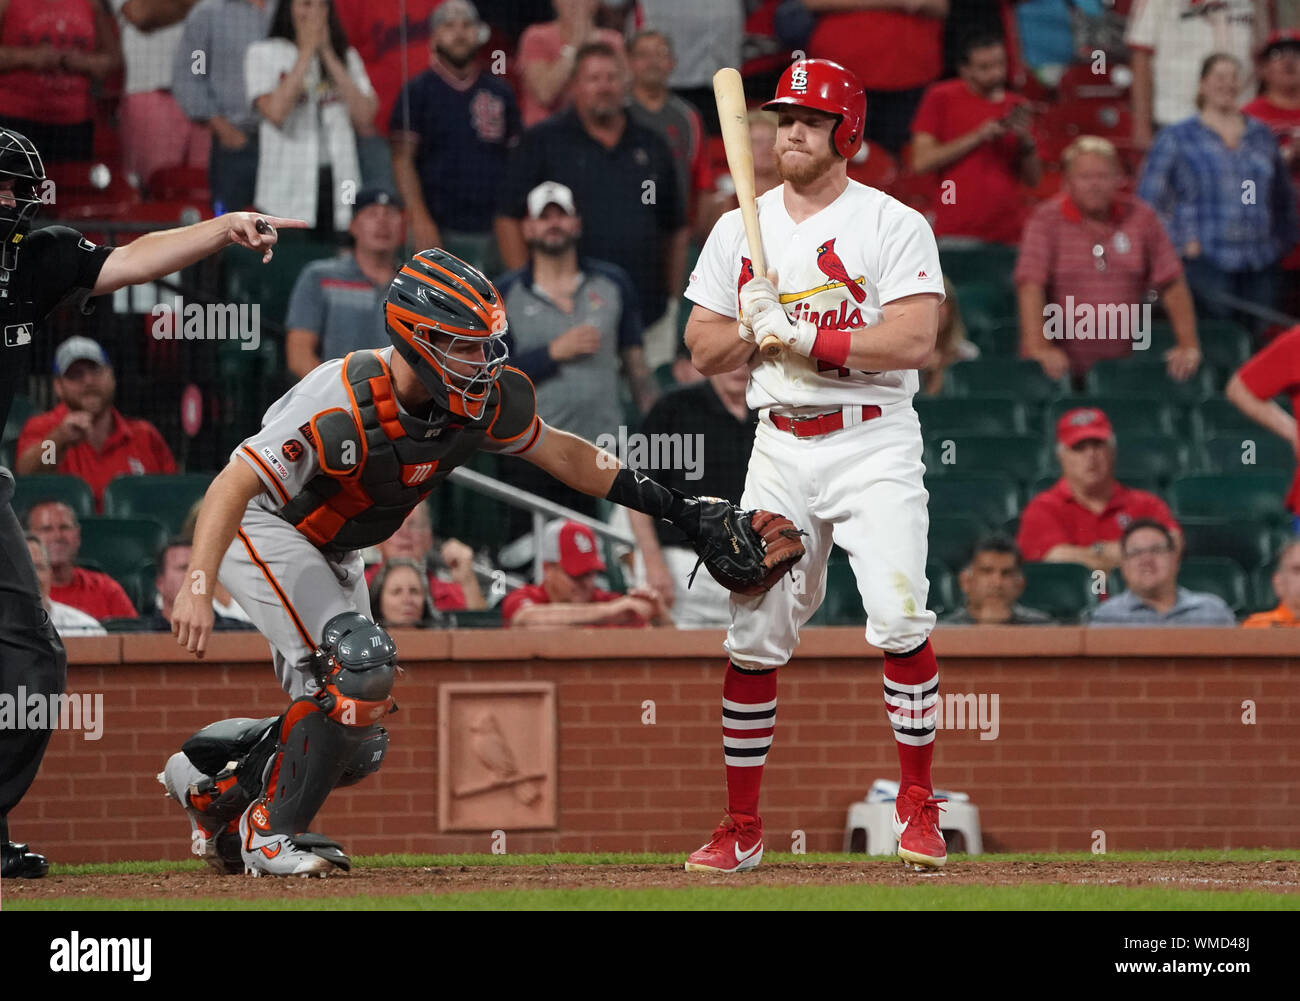 San Francisco Giants catcher Buster Posey tags out St. Louis Cardinals Harrison Bader to end the game at Busch Stadium in St. Louis on Wednesday, September 4, 2019. San Francisco defeated St. Louis, 9-8.    Photo by Bill Greenblatt/UPI Stock Photo